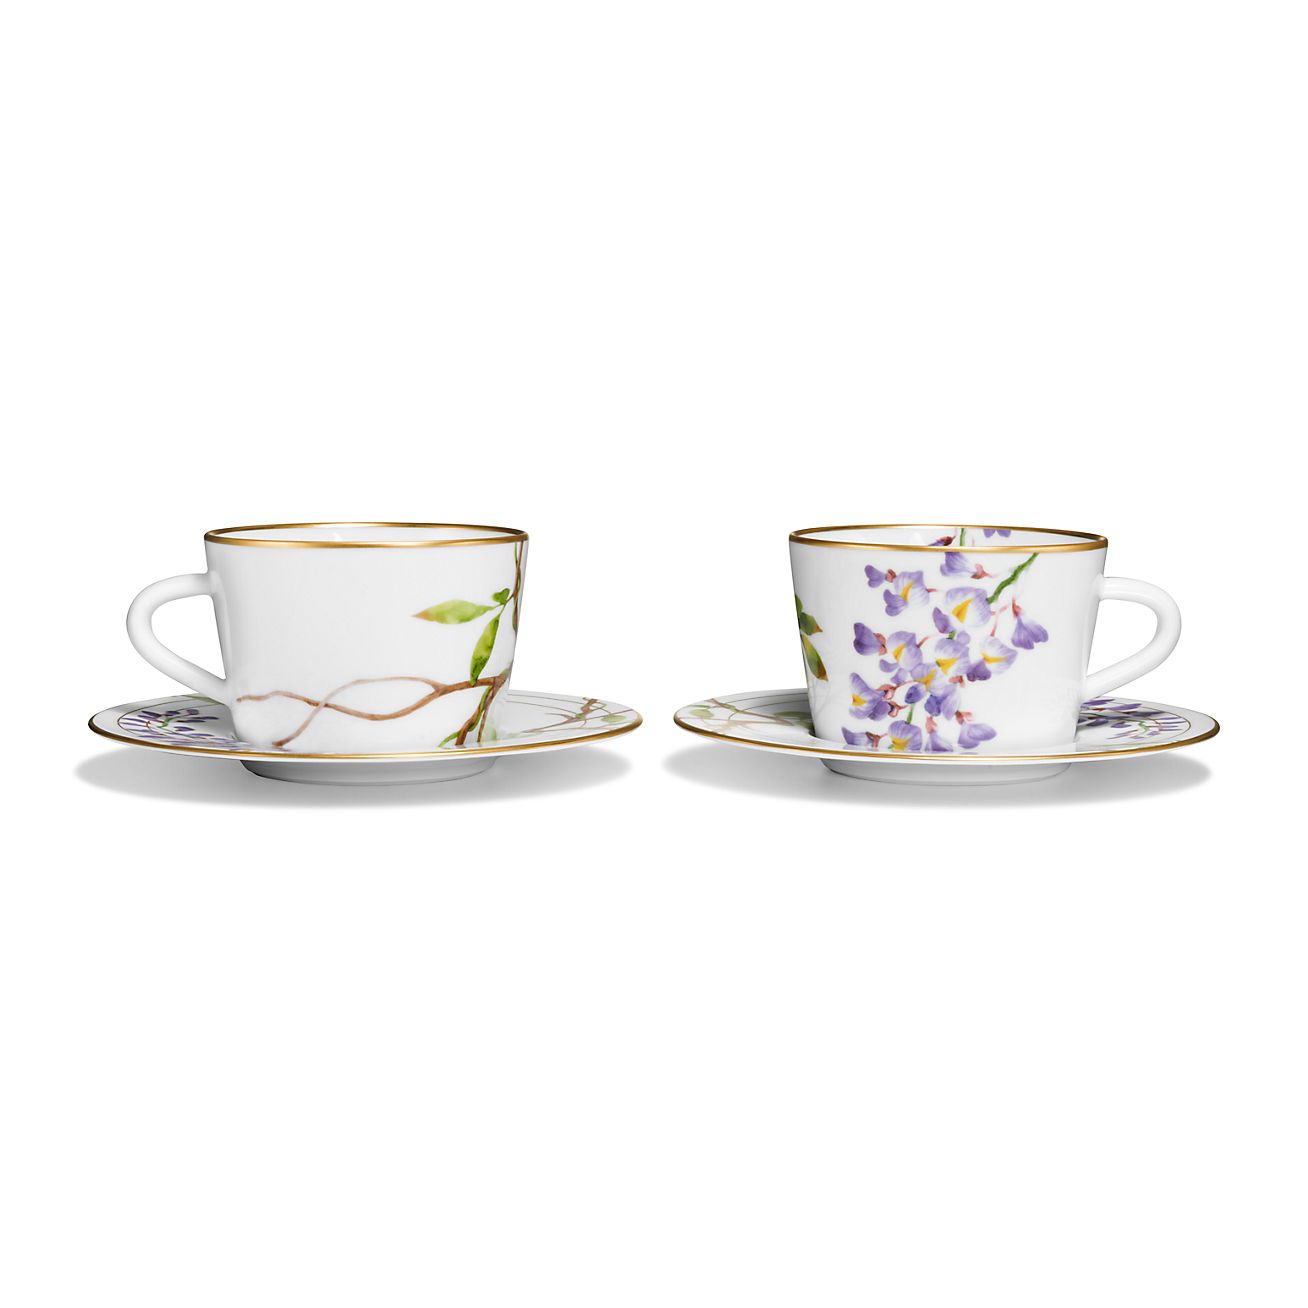 Tiffany Wisteria Teacup and Saucer Set of Two, in Porcelain